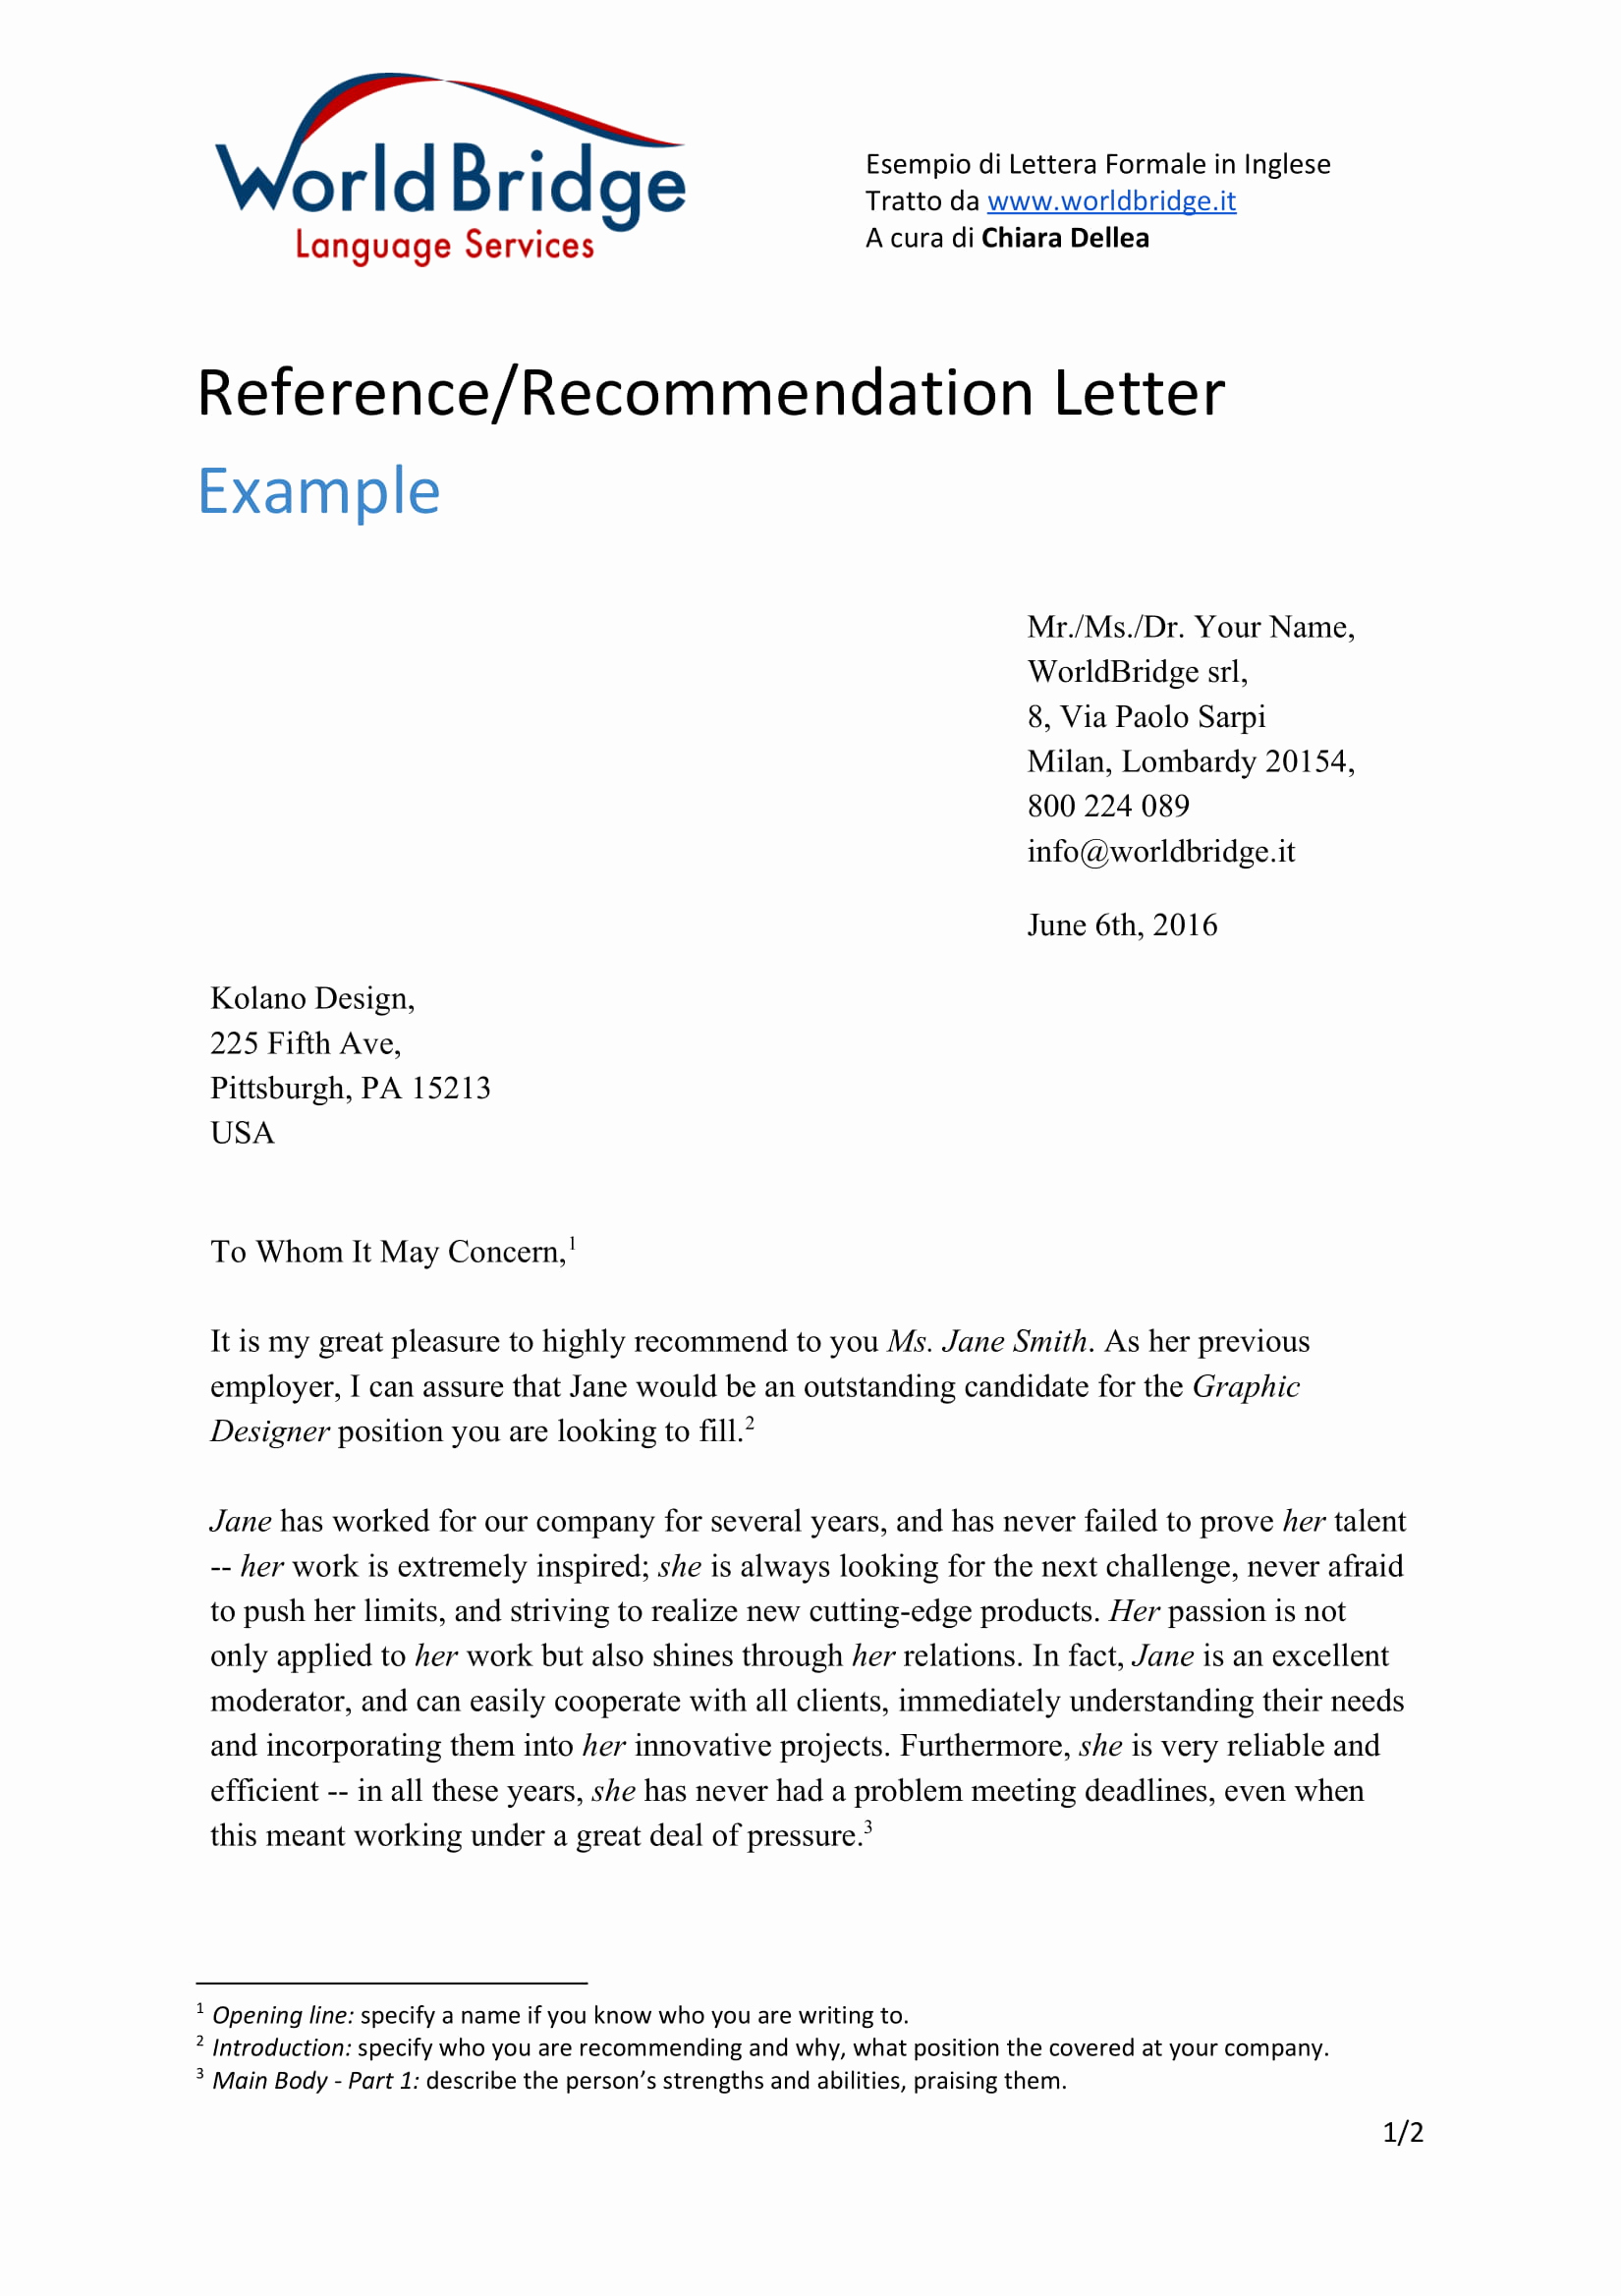 reference letter from a previous employer